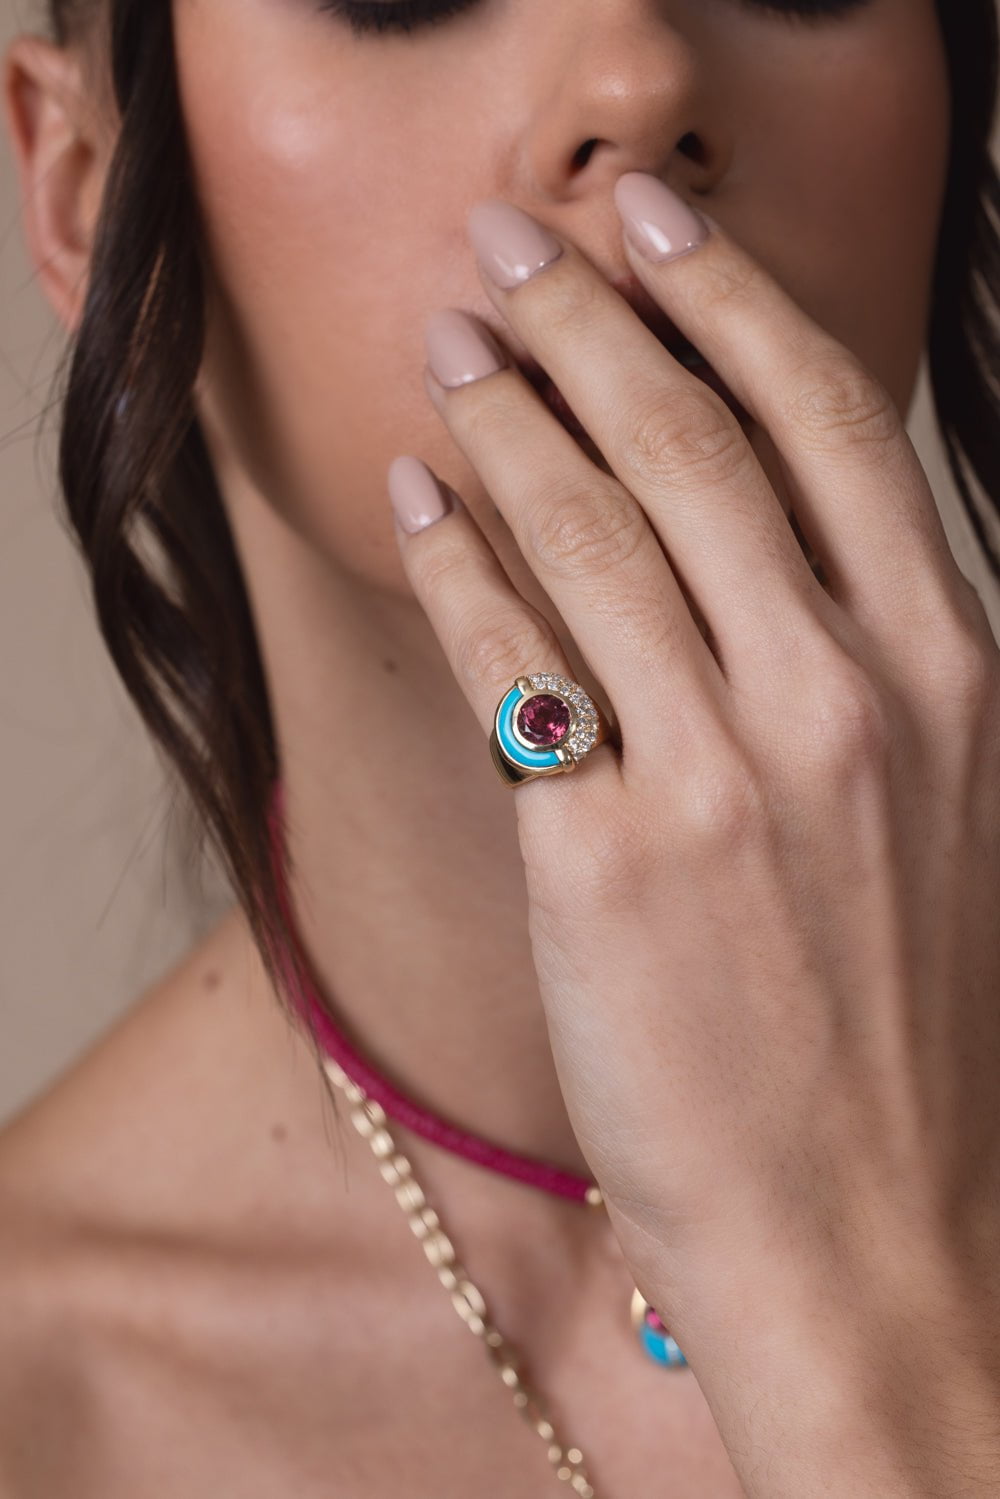 MASON & BOOKS-Turquoise Sugar And Spice Ring-YELLOW GOLD